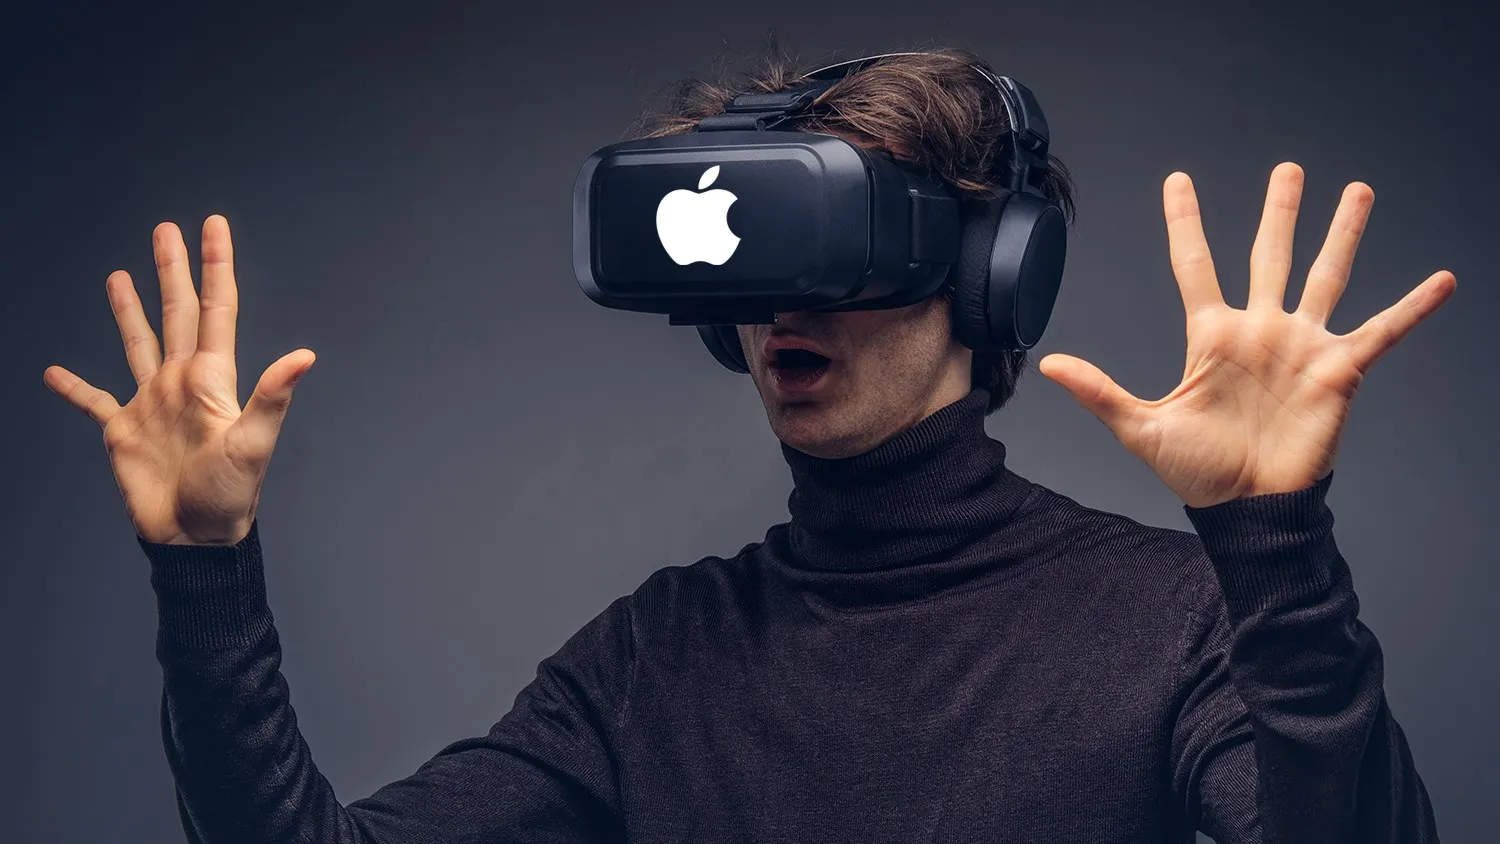 Apple's AR technology and its potential uses in Turkey